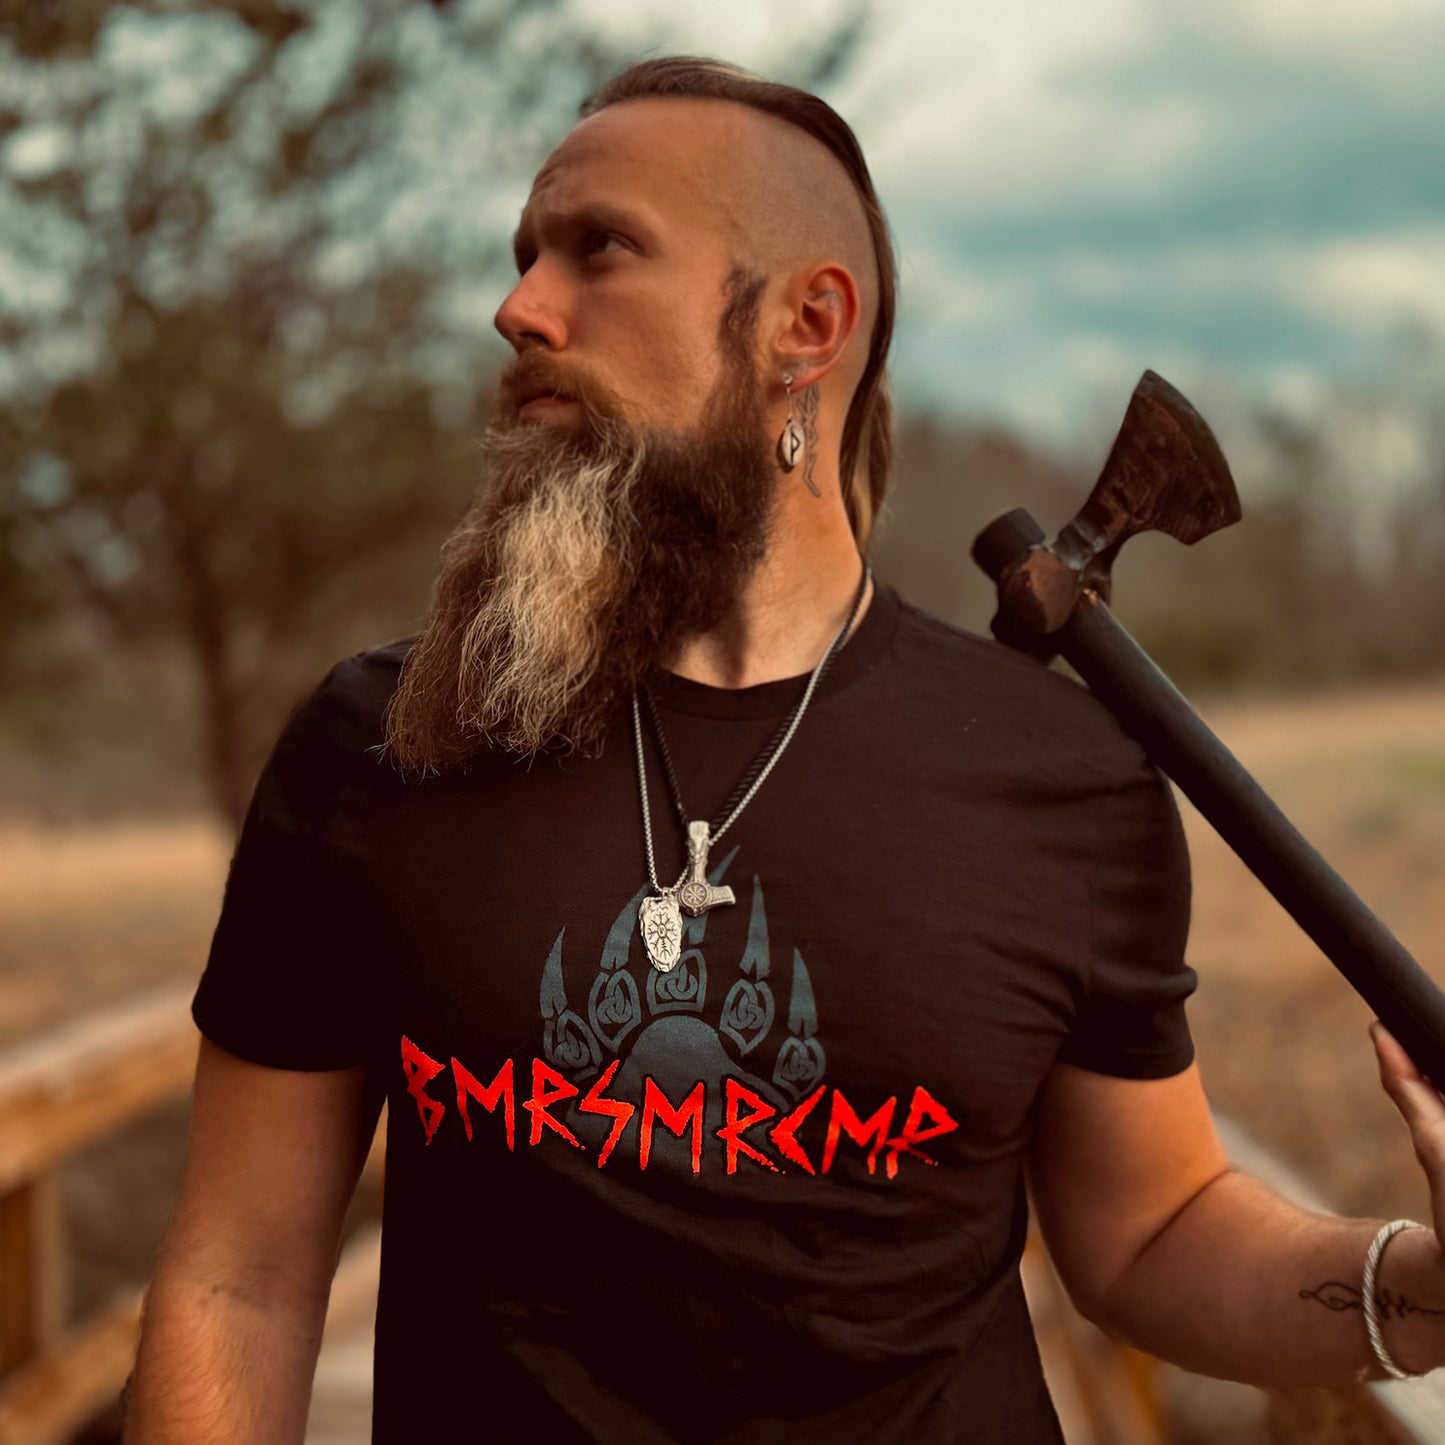 A photo of David Christiansen in a black crew neck tee, holding an axe over one shoulder. The shirt has a blue bear claw behind bold red, carving-style letters that visually resemble "BMRSMRCMR", but translate to "BERSERKER".